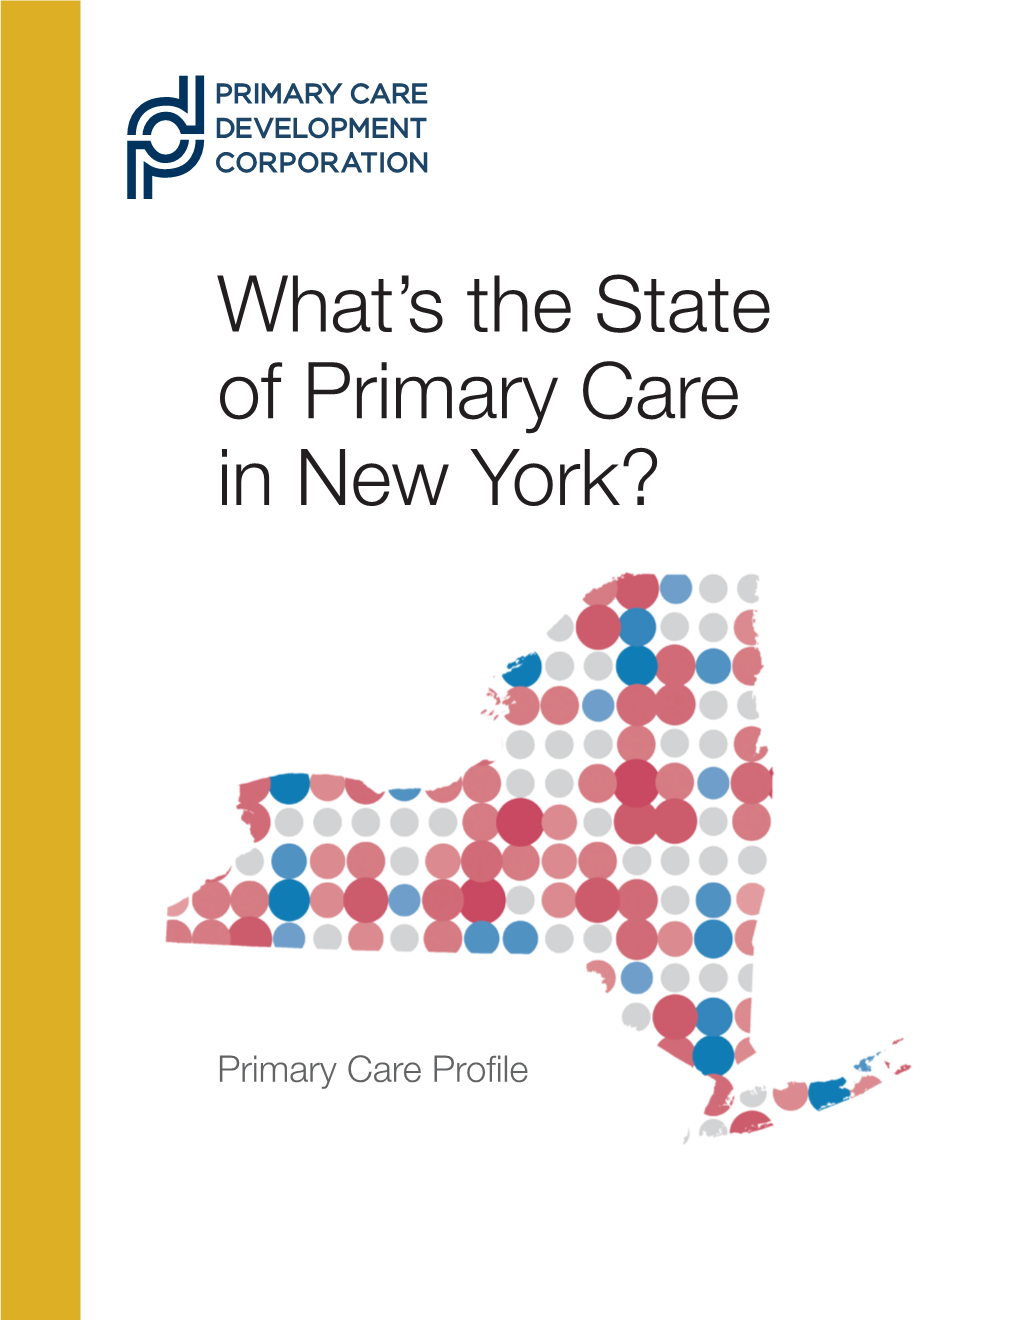 What's the State of Primary Care in New York?